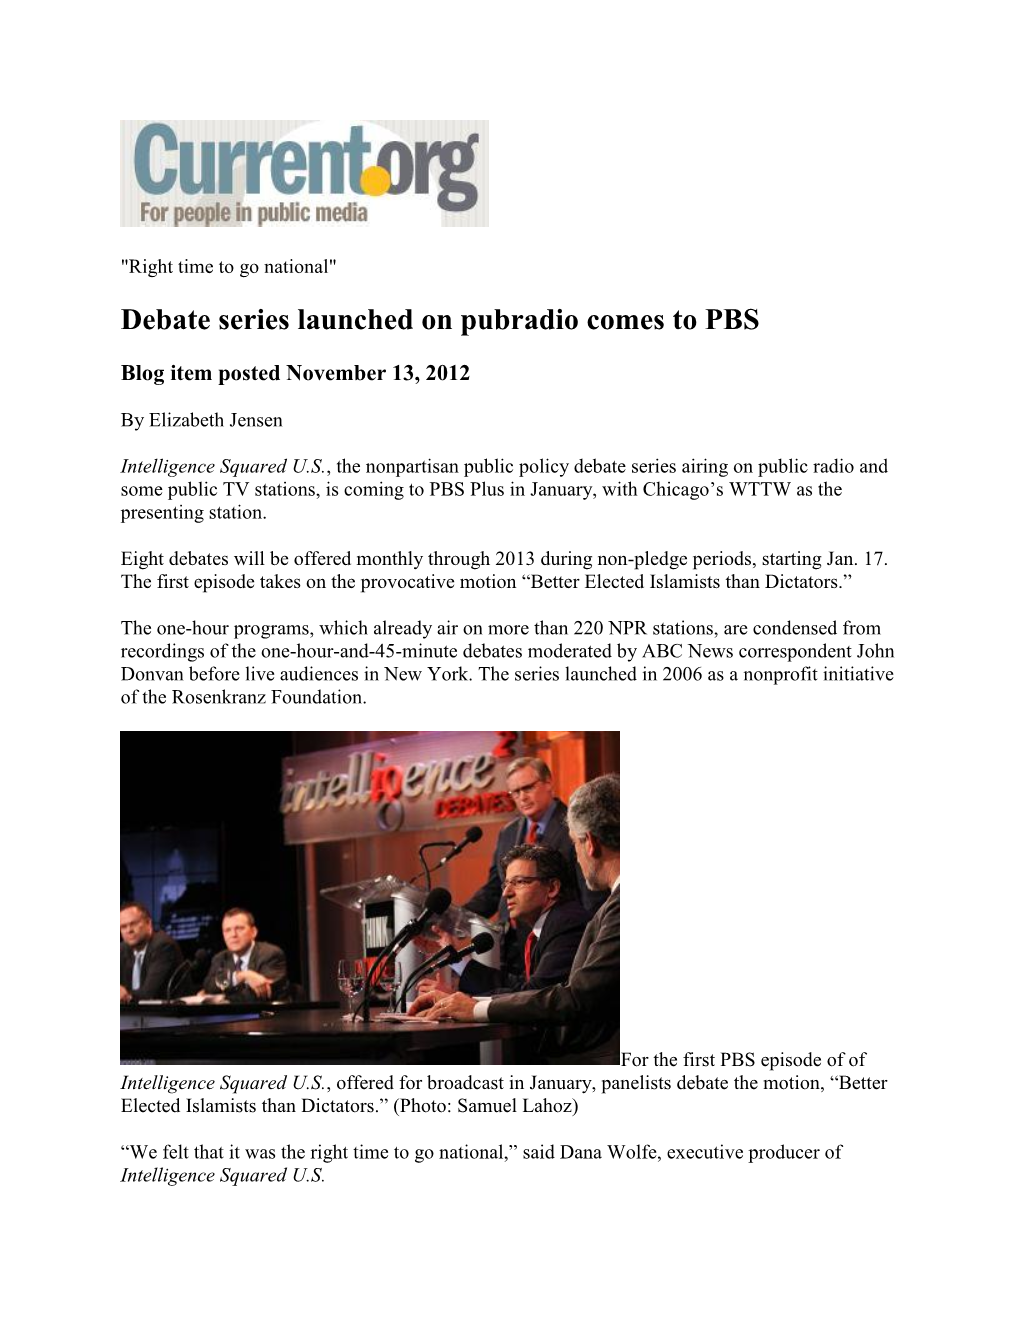 Debate Series Launched on Pubradio Comes to PBS